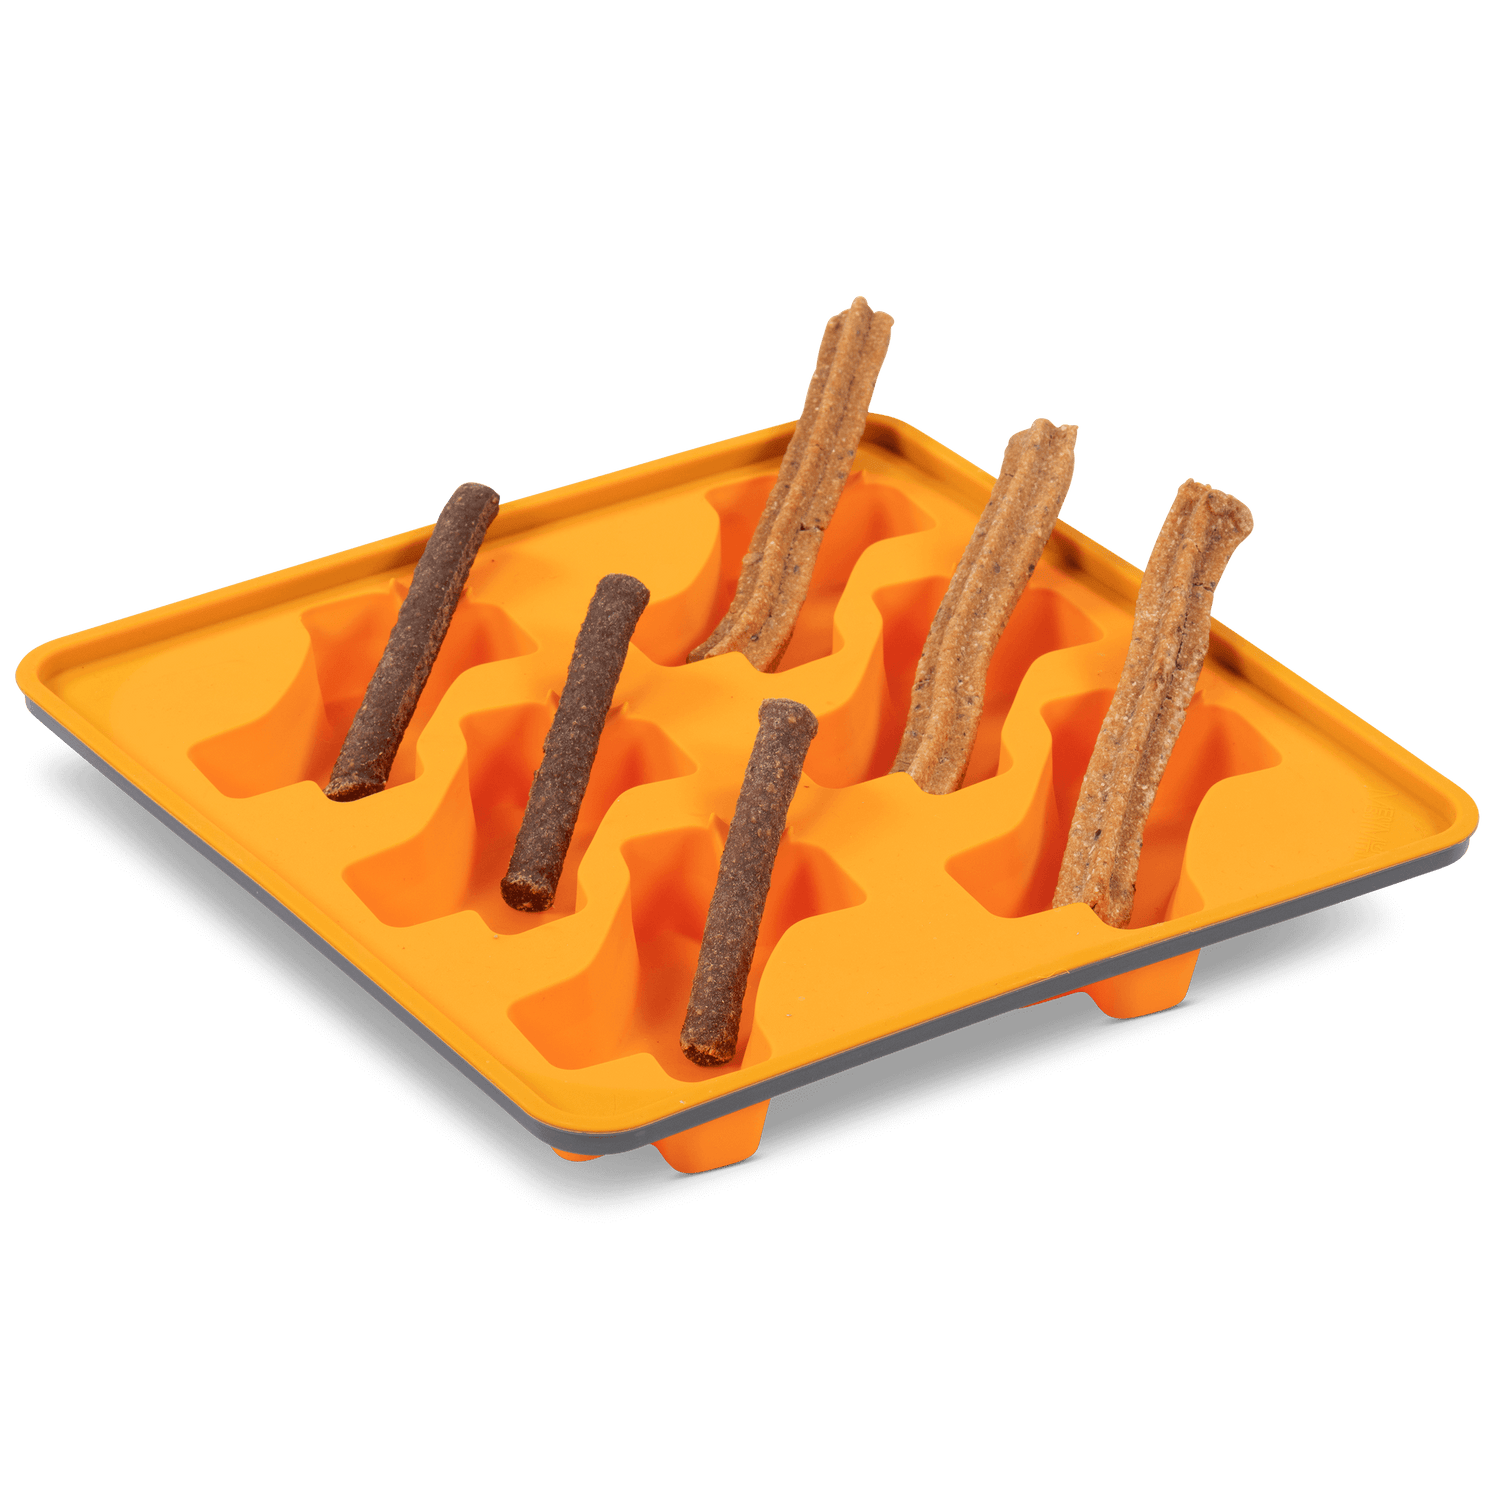 Orange pupsicle molds for DIY dog treat makers.  Add your favorite edible stick and enjoy feeding it to your dog.  